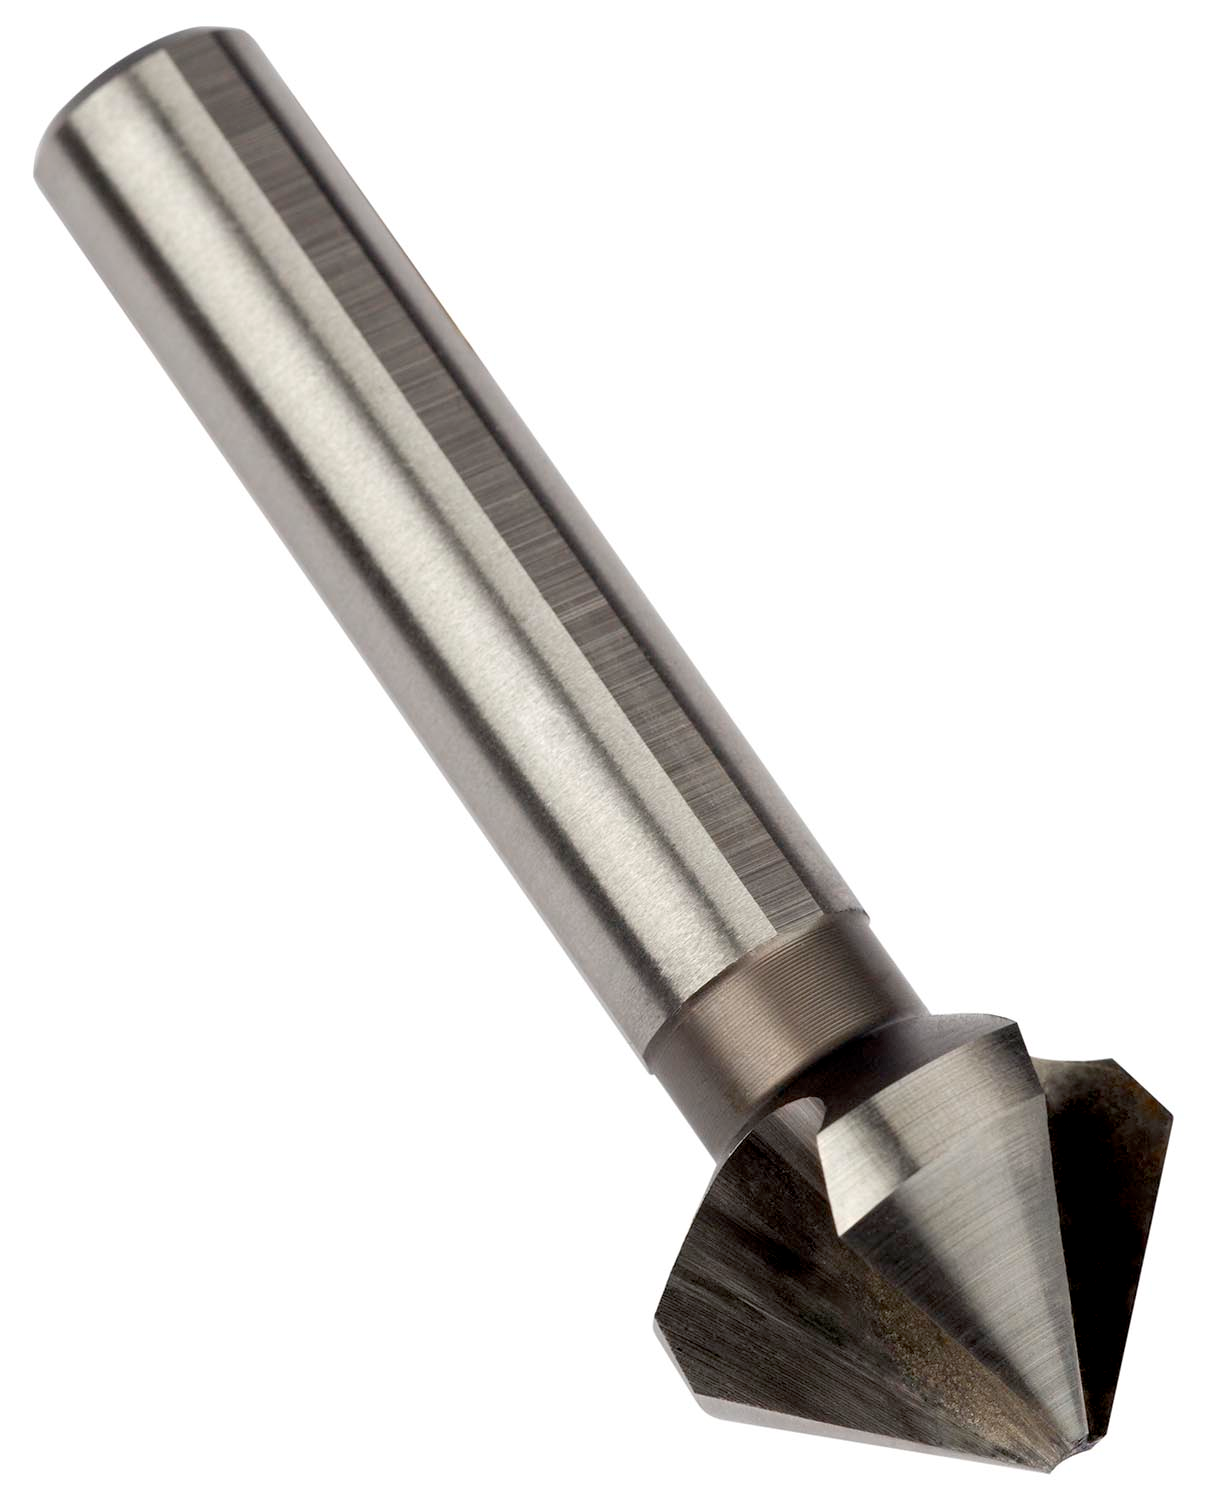 20.5 mm Body Dia. 90 Degrees Bright Round Shank Dormer G136 Series High-Speed Steel Single-End Countersink 10 mm Shank Dia 3 Flutes Finish Uncoated 